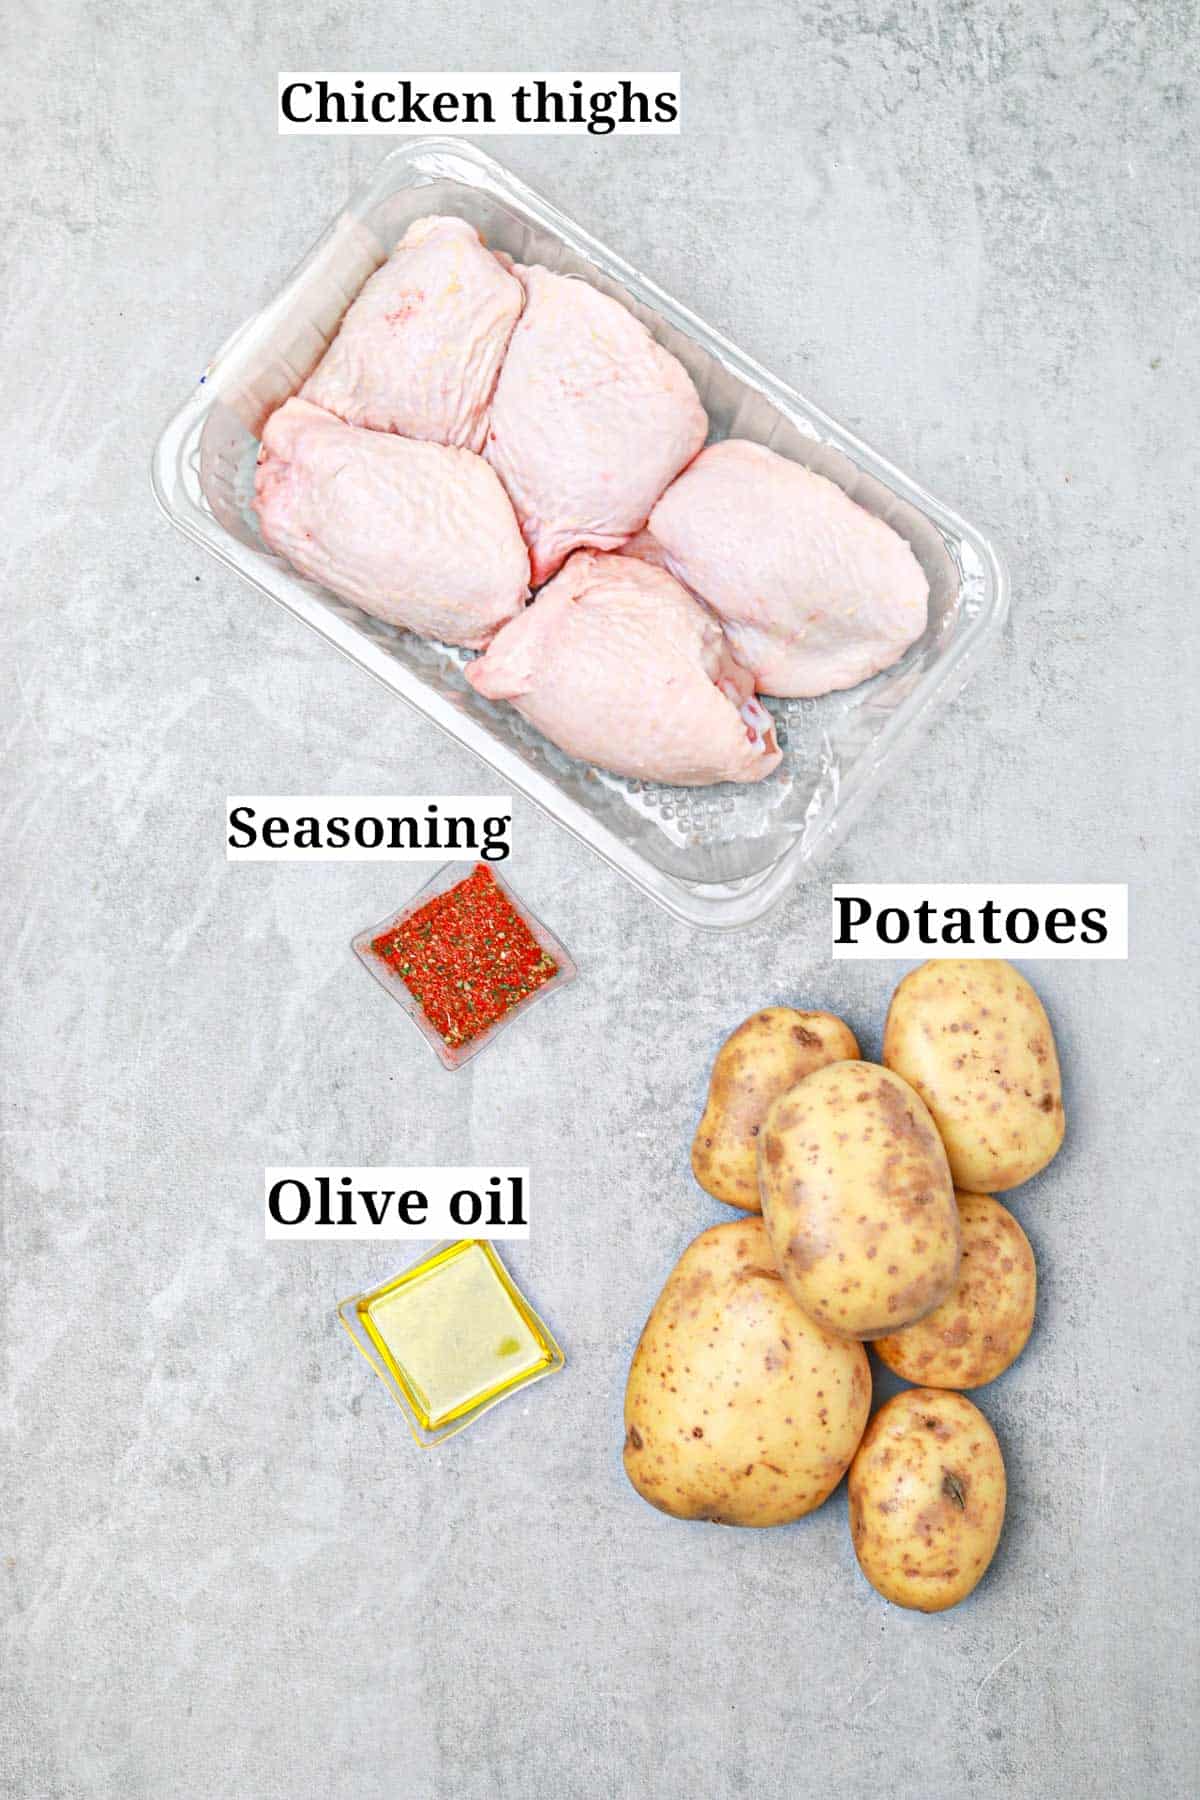 ingredients displayed and labelled.